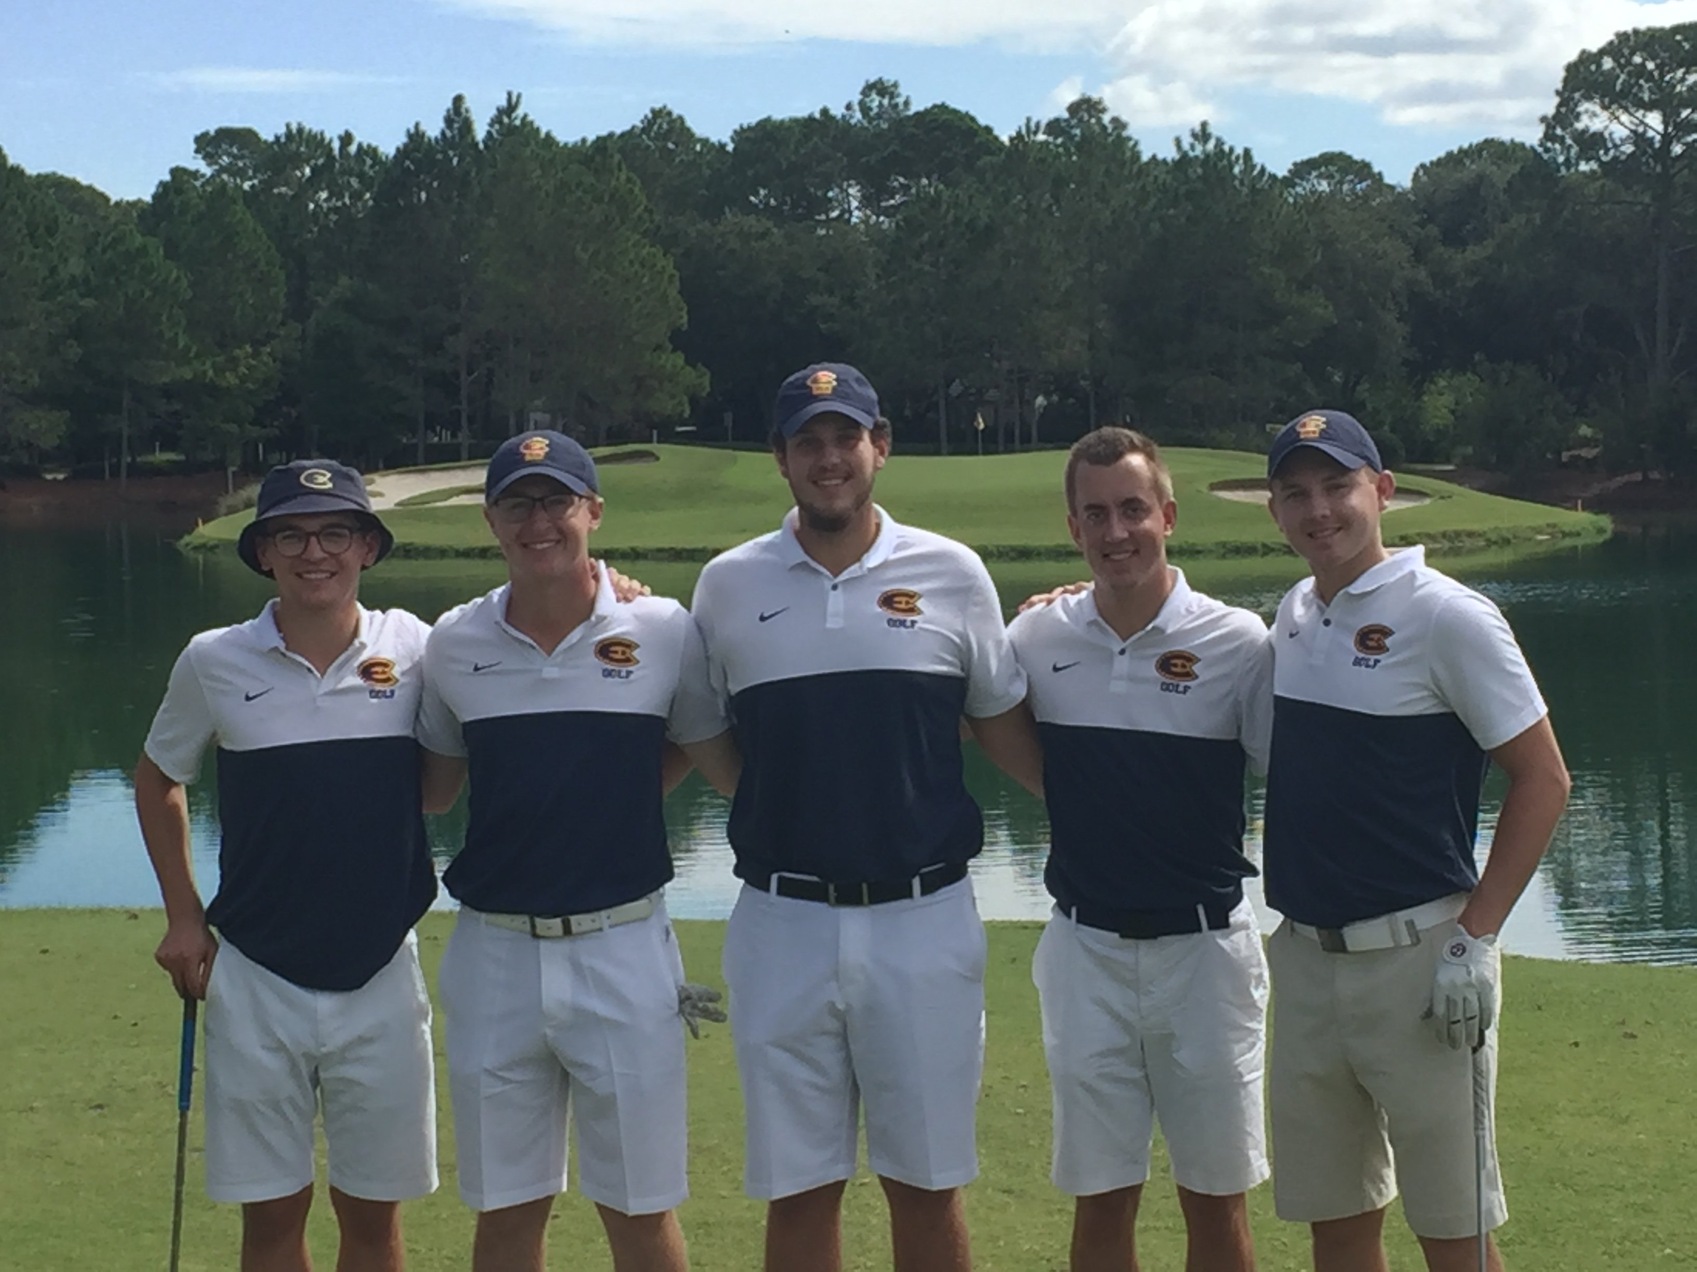 Men's Golf moves into 6th place after Rd. 2 of Golfweek DIII Invite